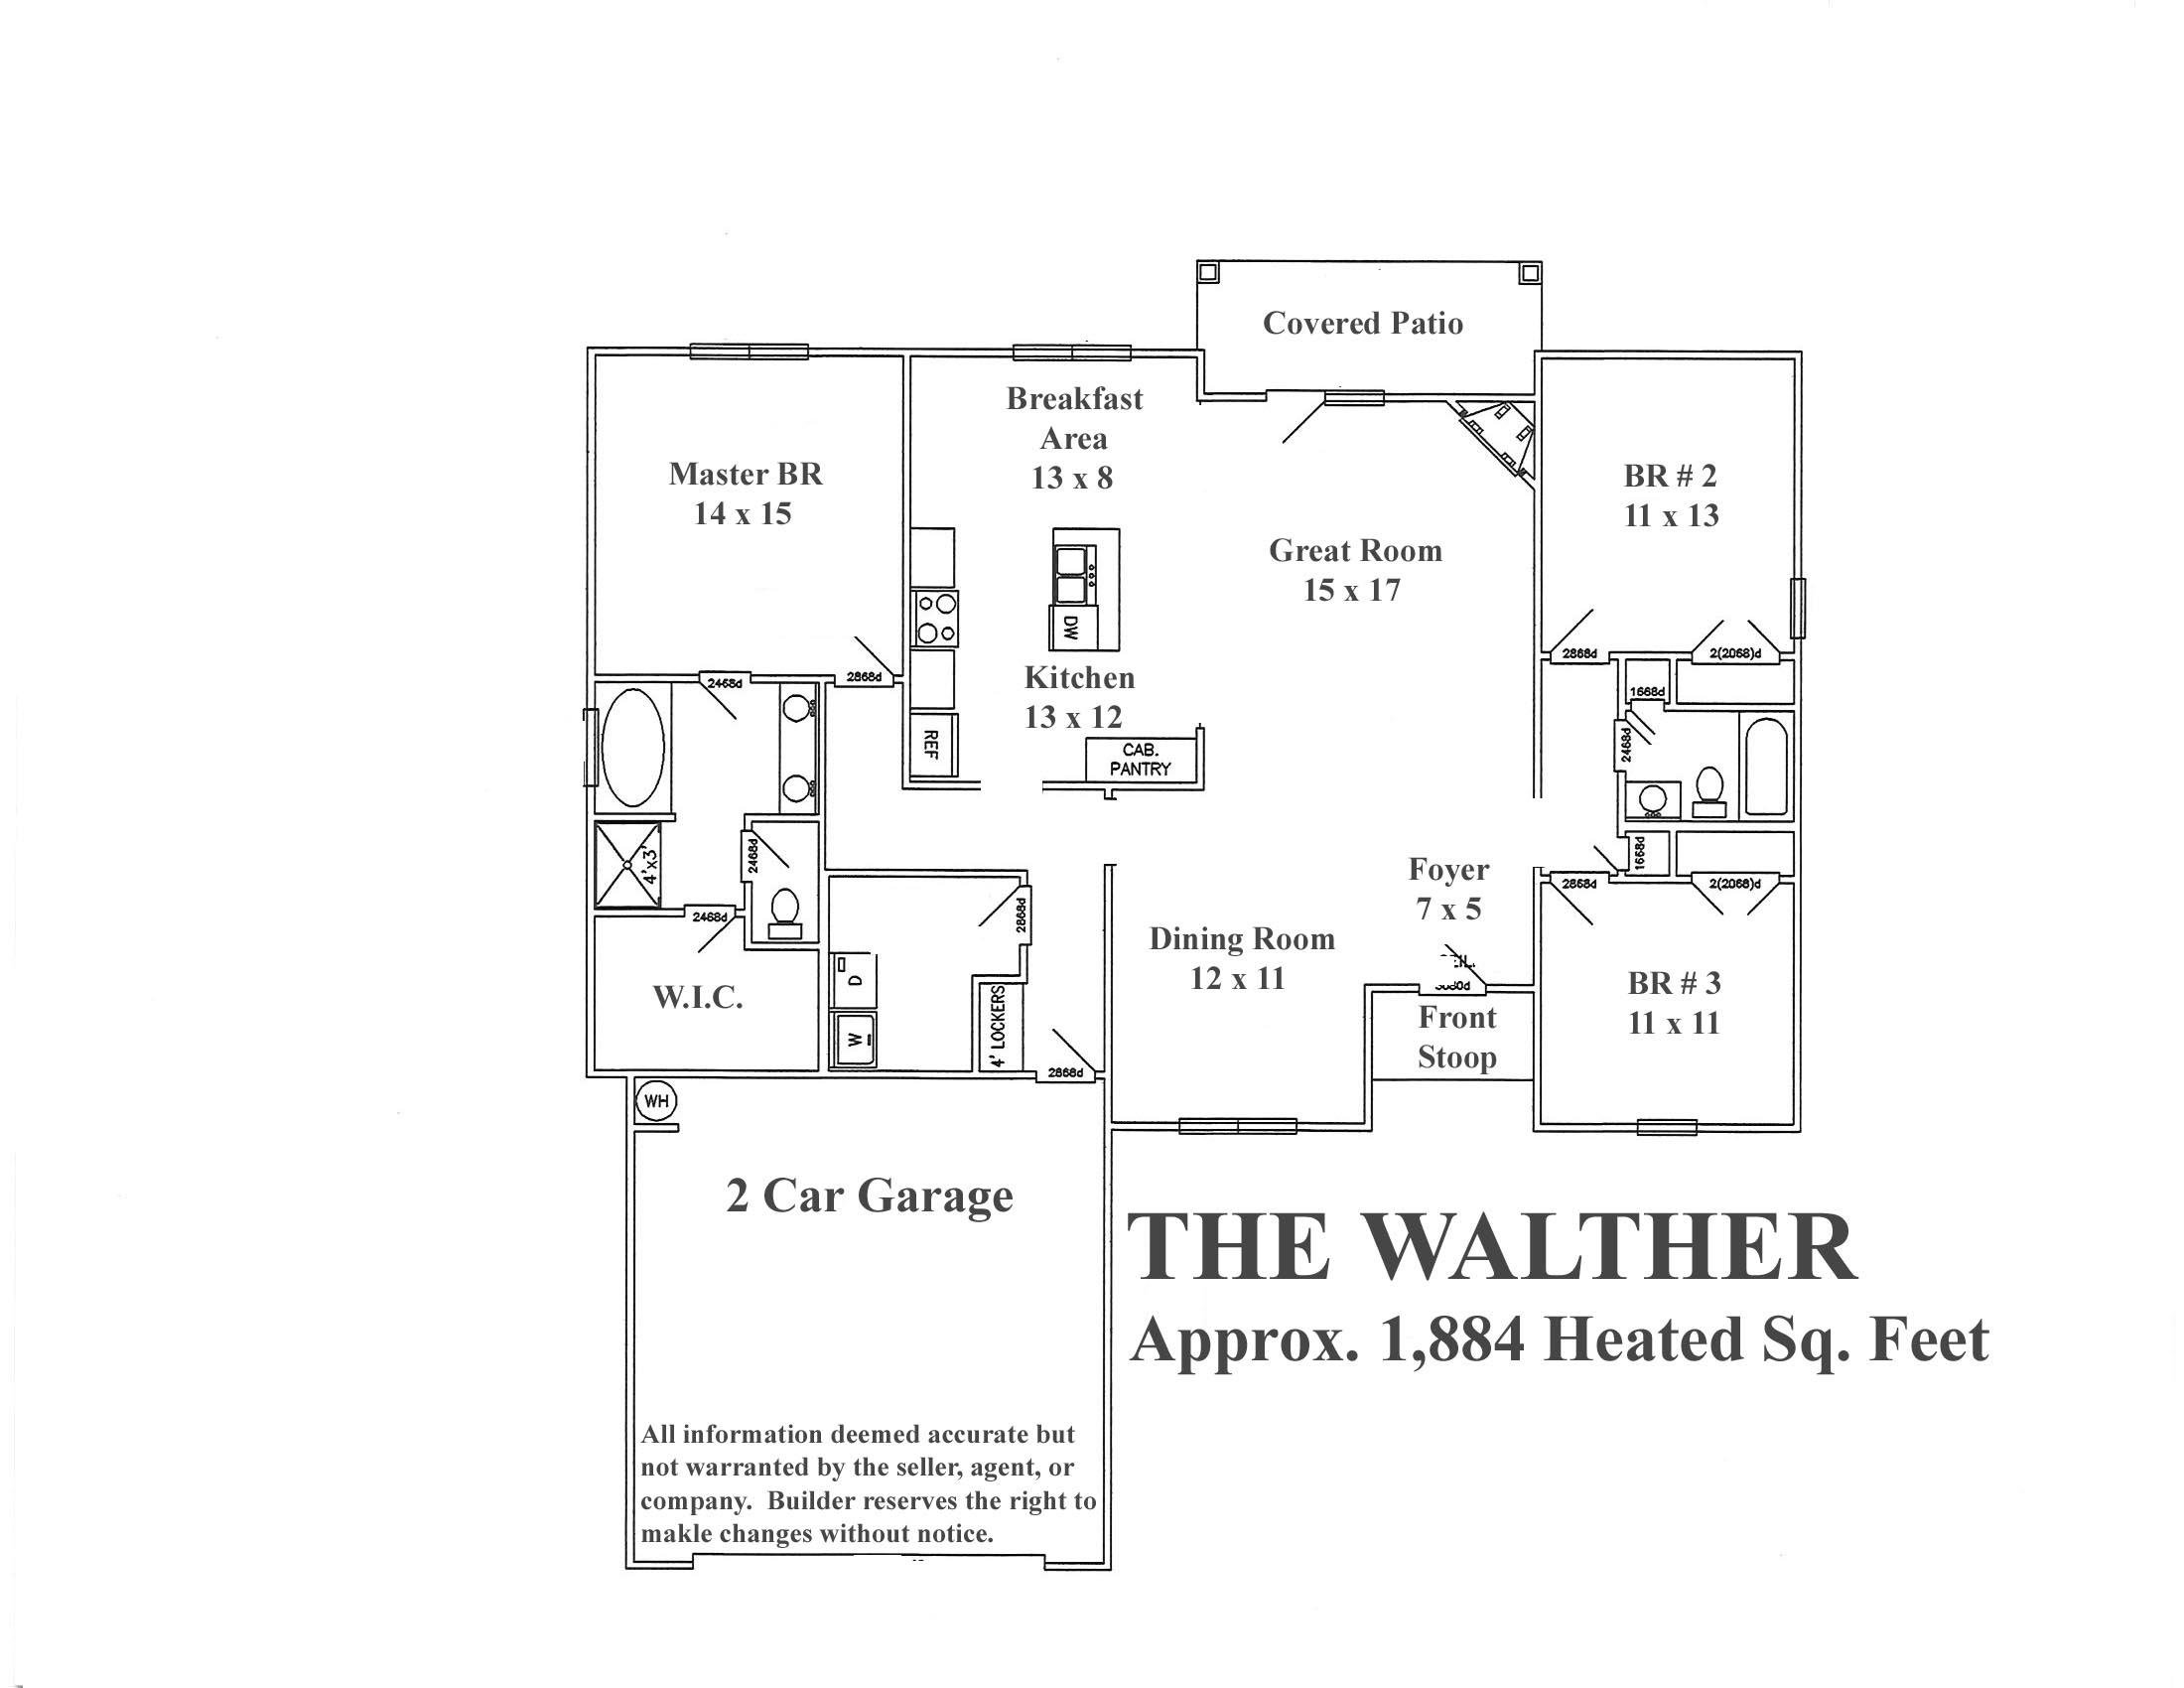 The Walther